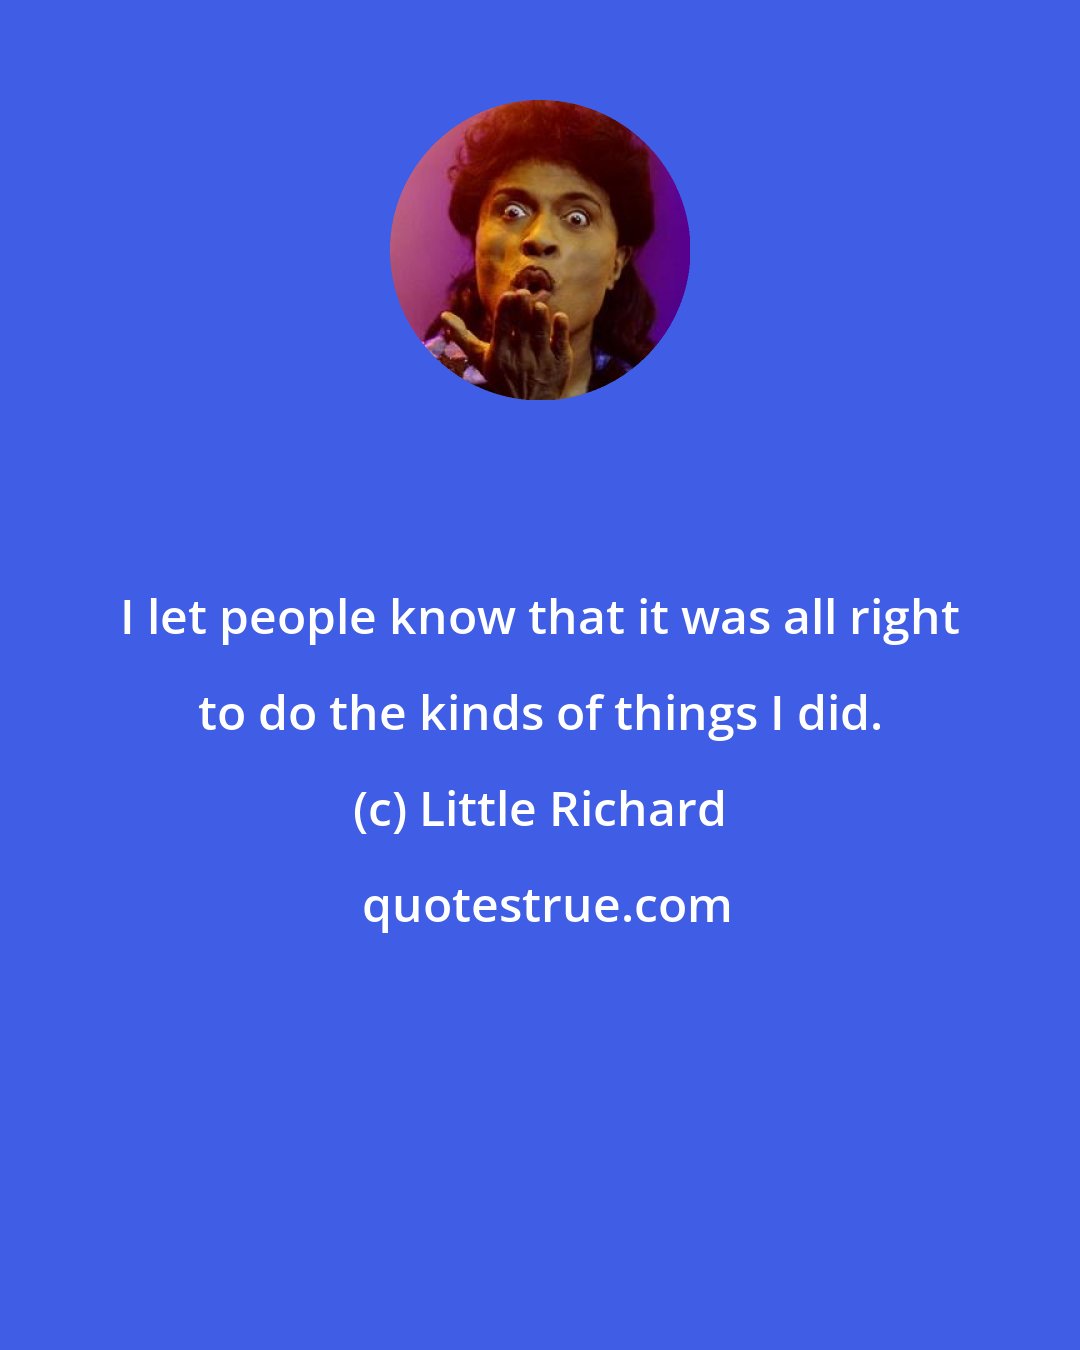 Little Richard: I let people know that it was all right to do the kinds of things I did.